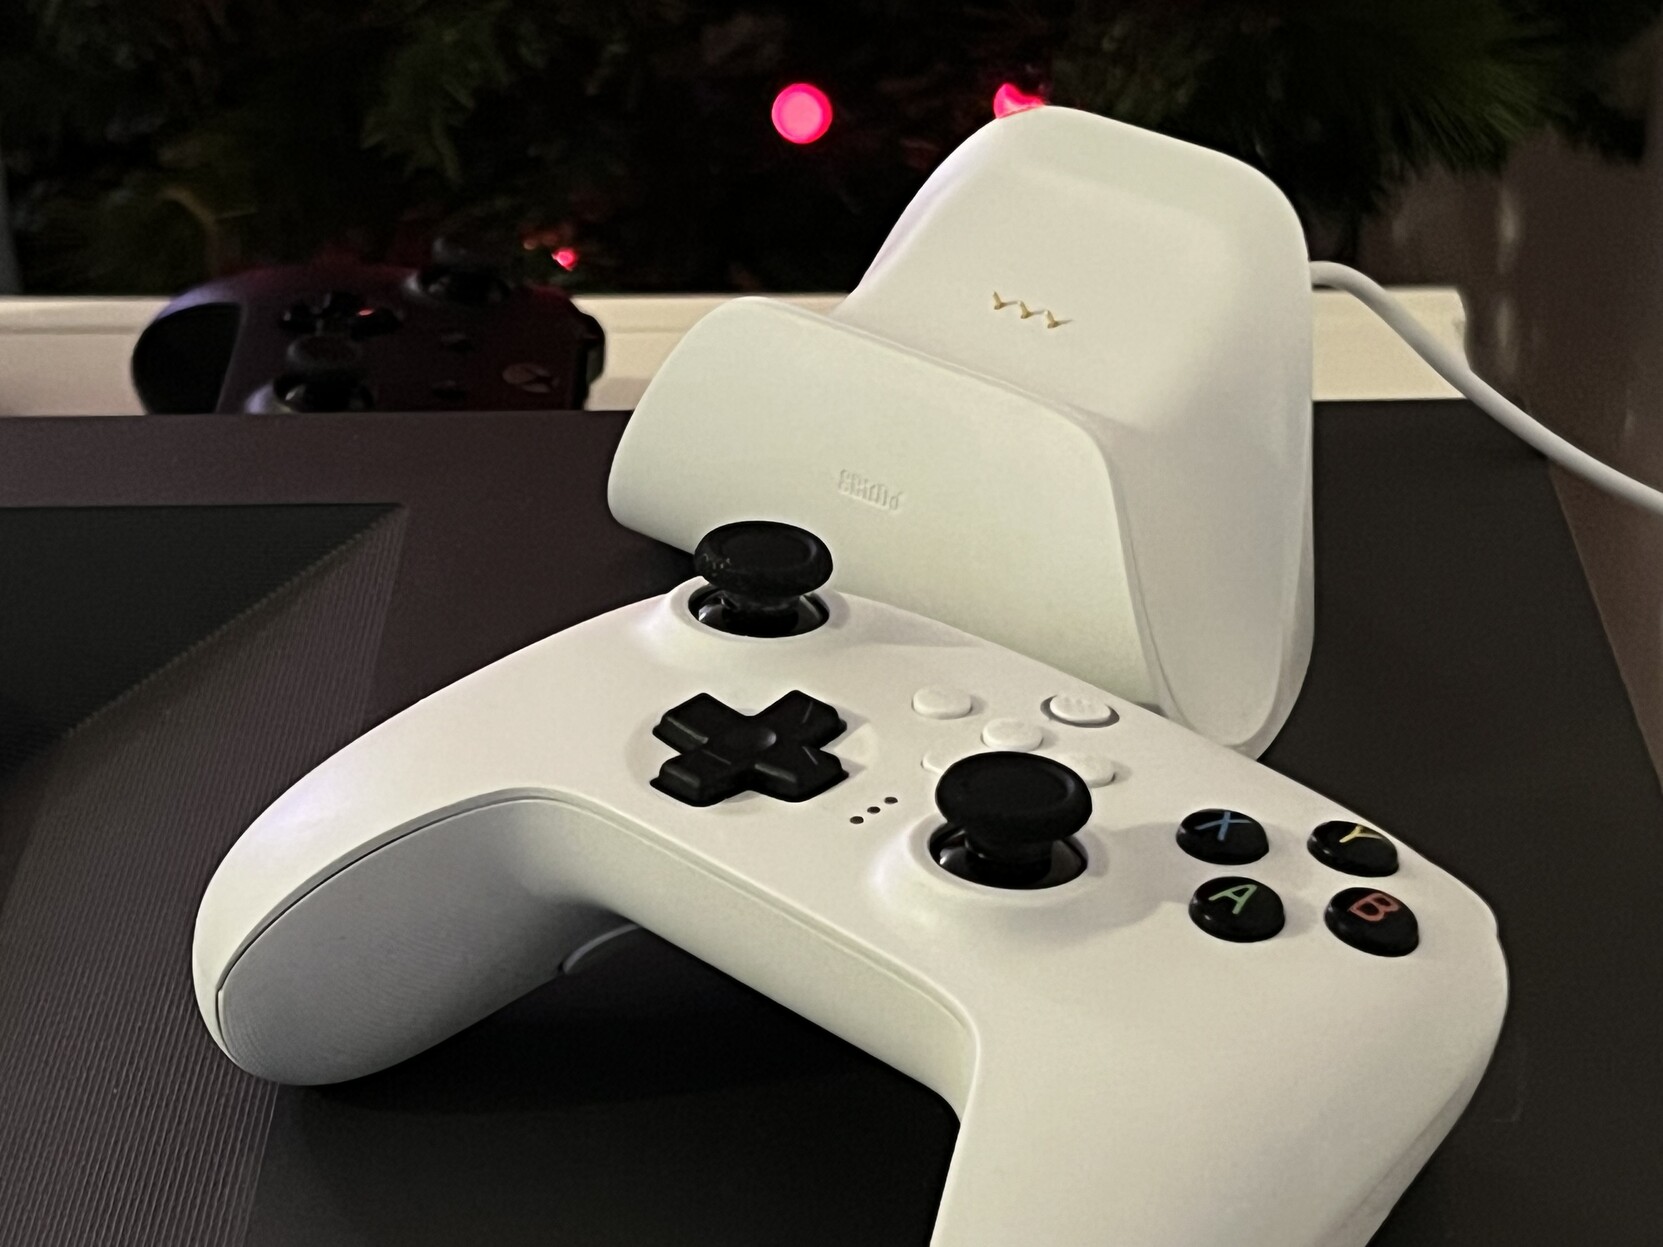 Stadia controller works on Nintendo Switch with 8BitDo Bluetooth